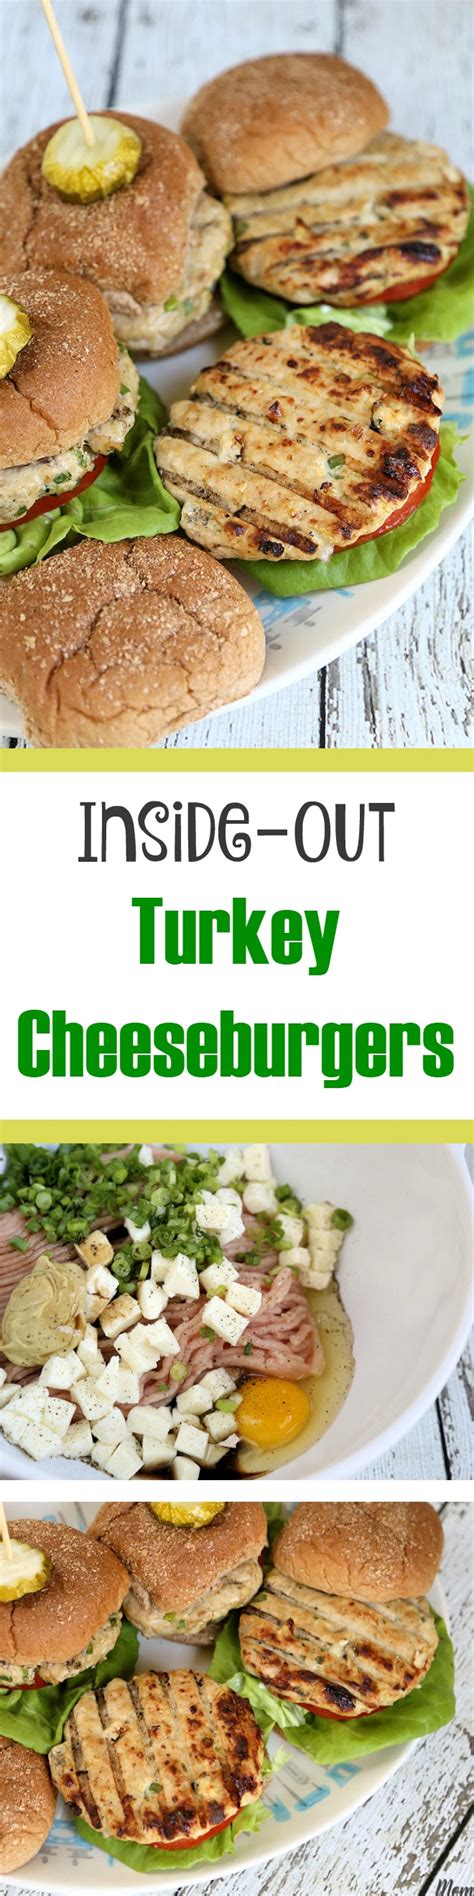 inside-out-turkey-cheeseburgers-mom-foodie image